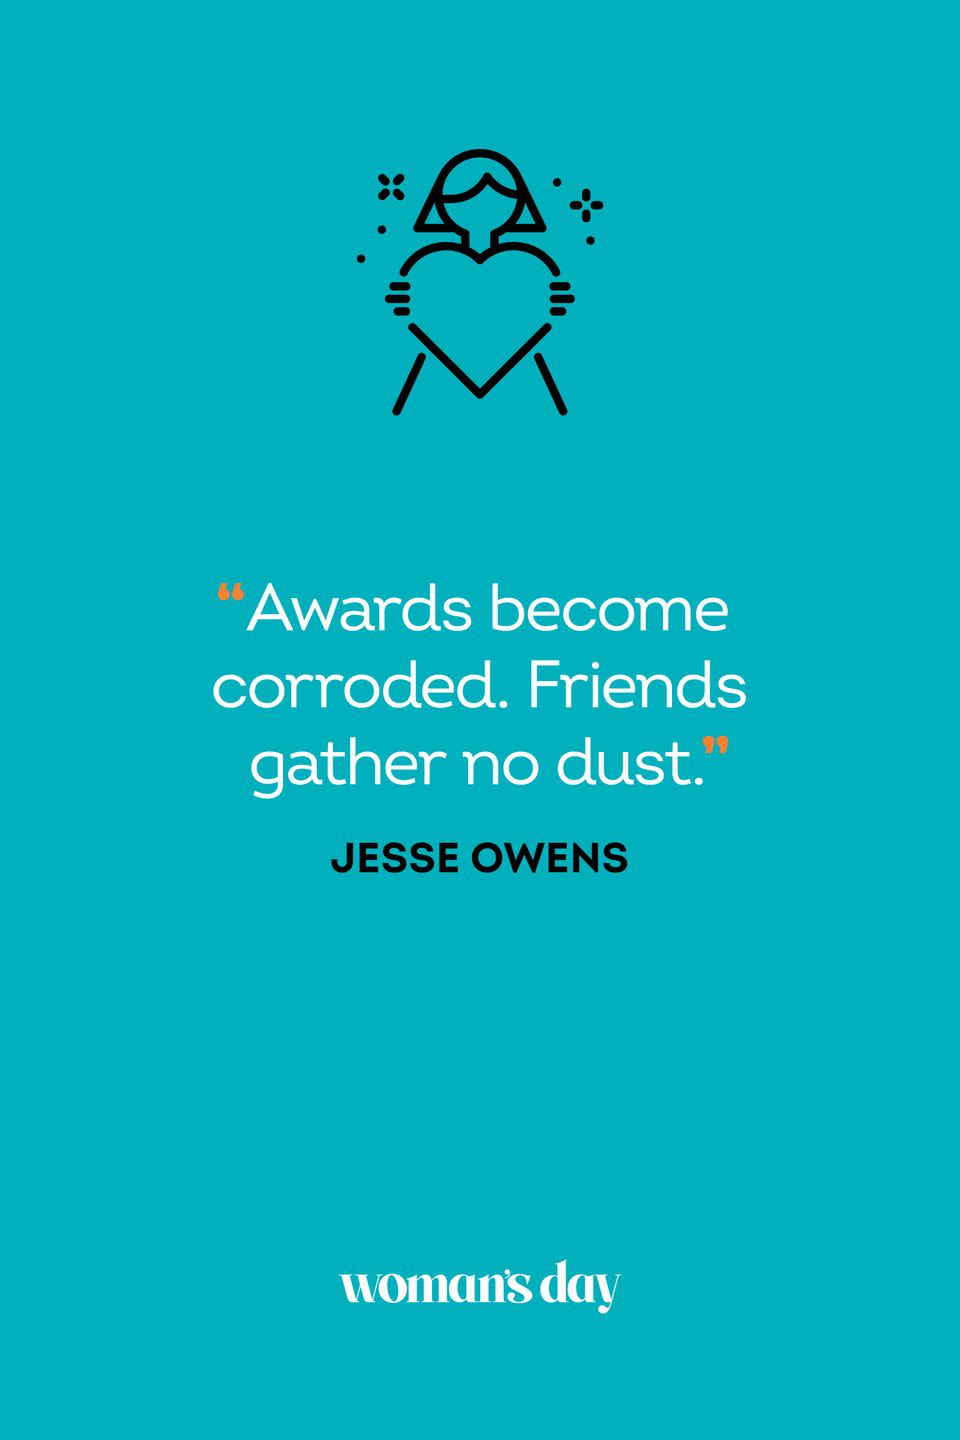 <p>“Awards become corroded. Friends gather no dust.”</p>